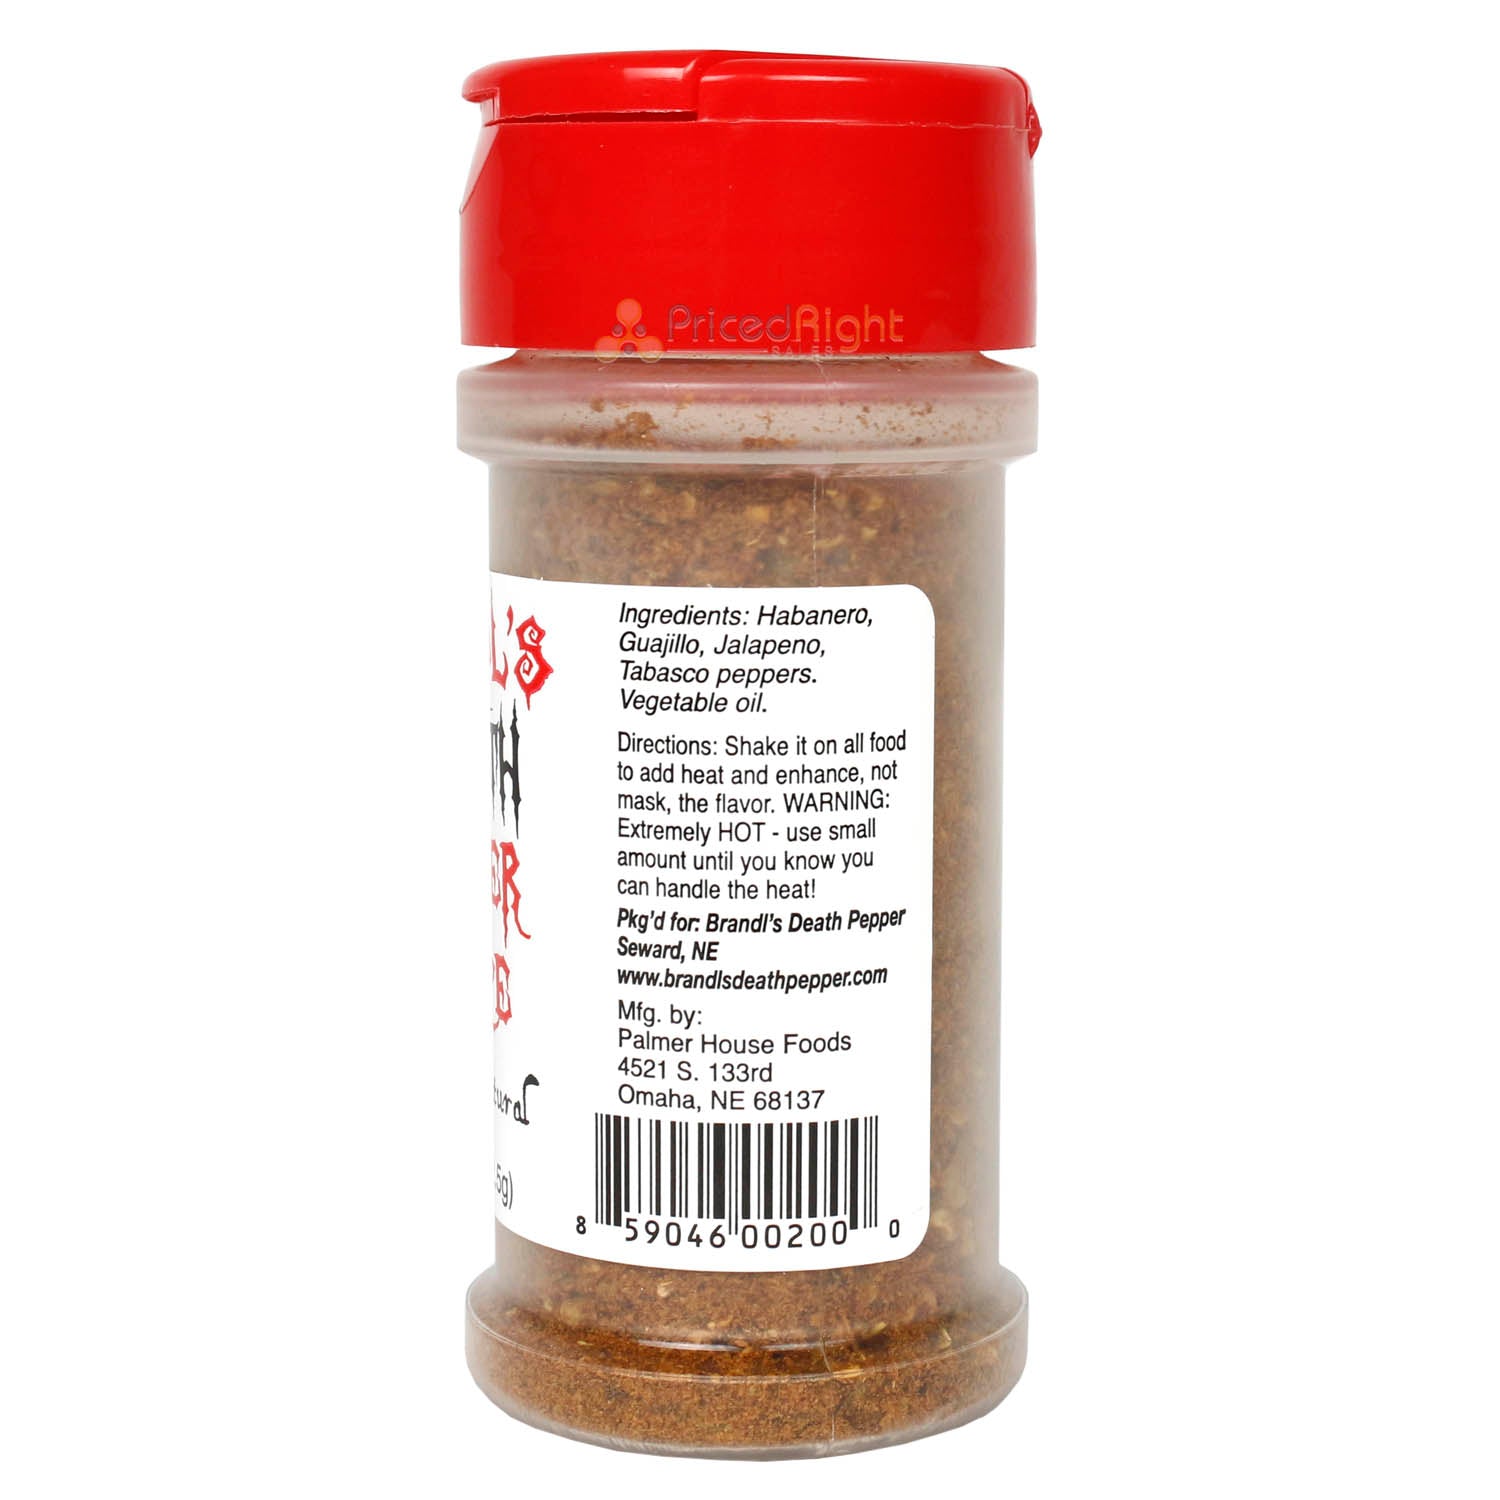 Brandl’s All Natural Death Pepper Spice Very Hot Topical Seasoning 1.5 oz